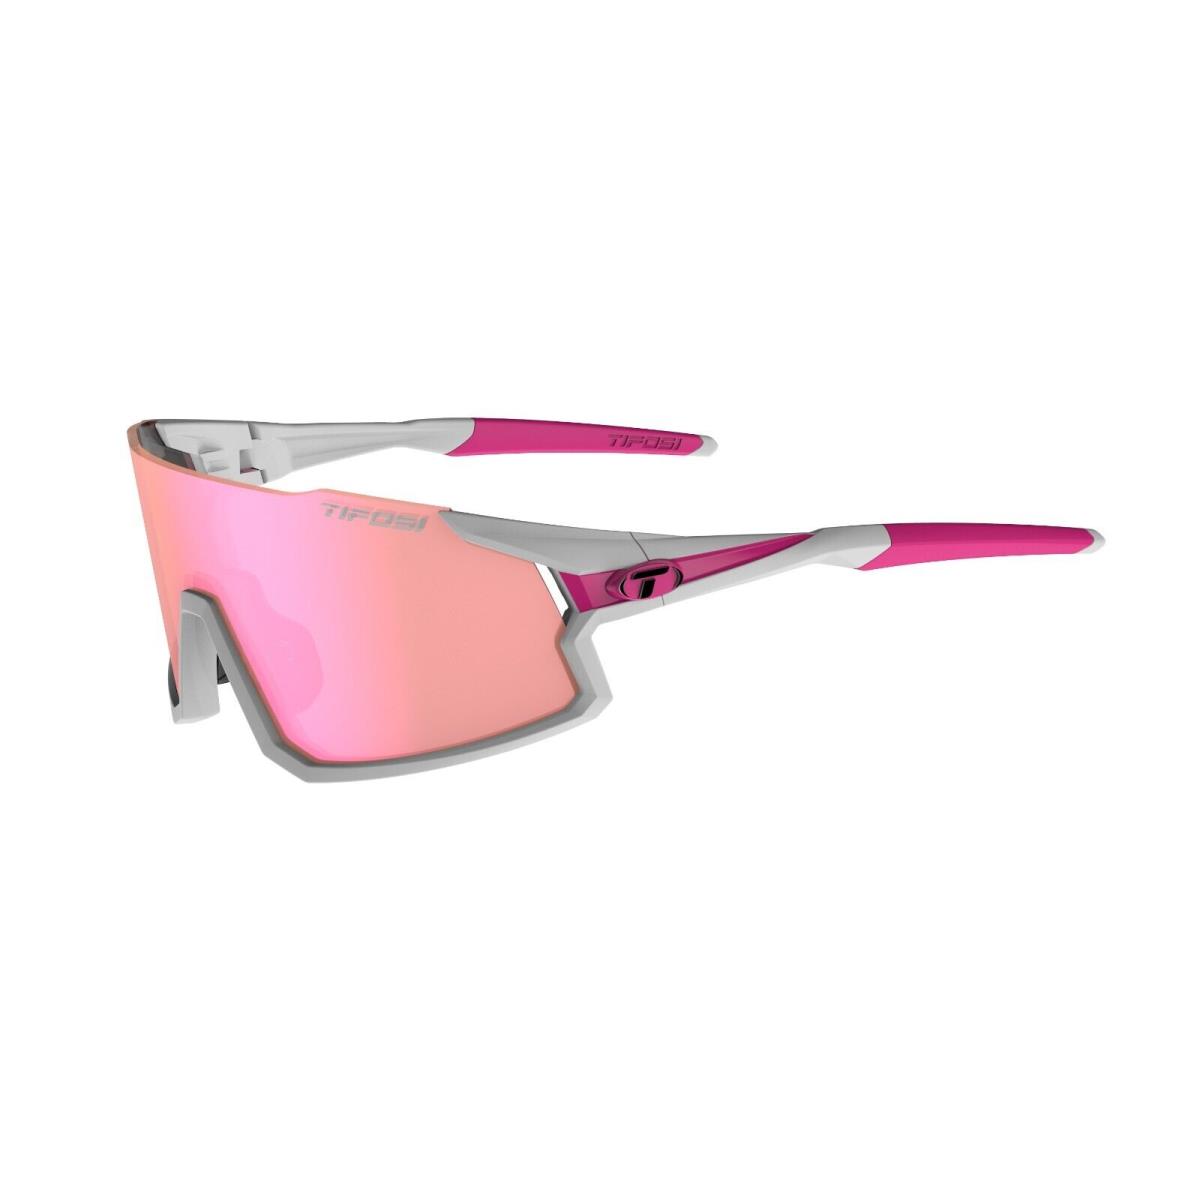 Tifosi Stash Black Smoke Blue Red Pink Sunglasses Choose Your Style Pink 3-Lens CYCLING